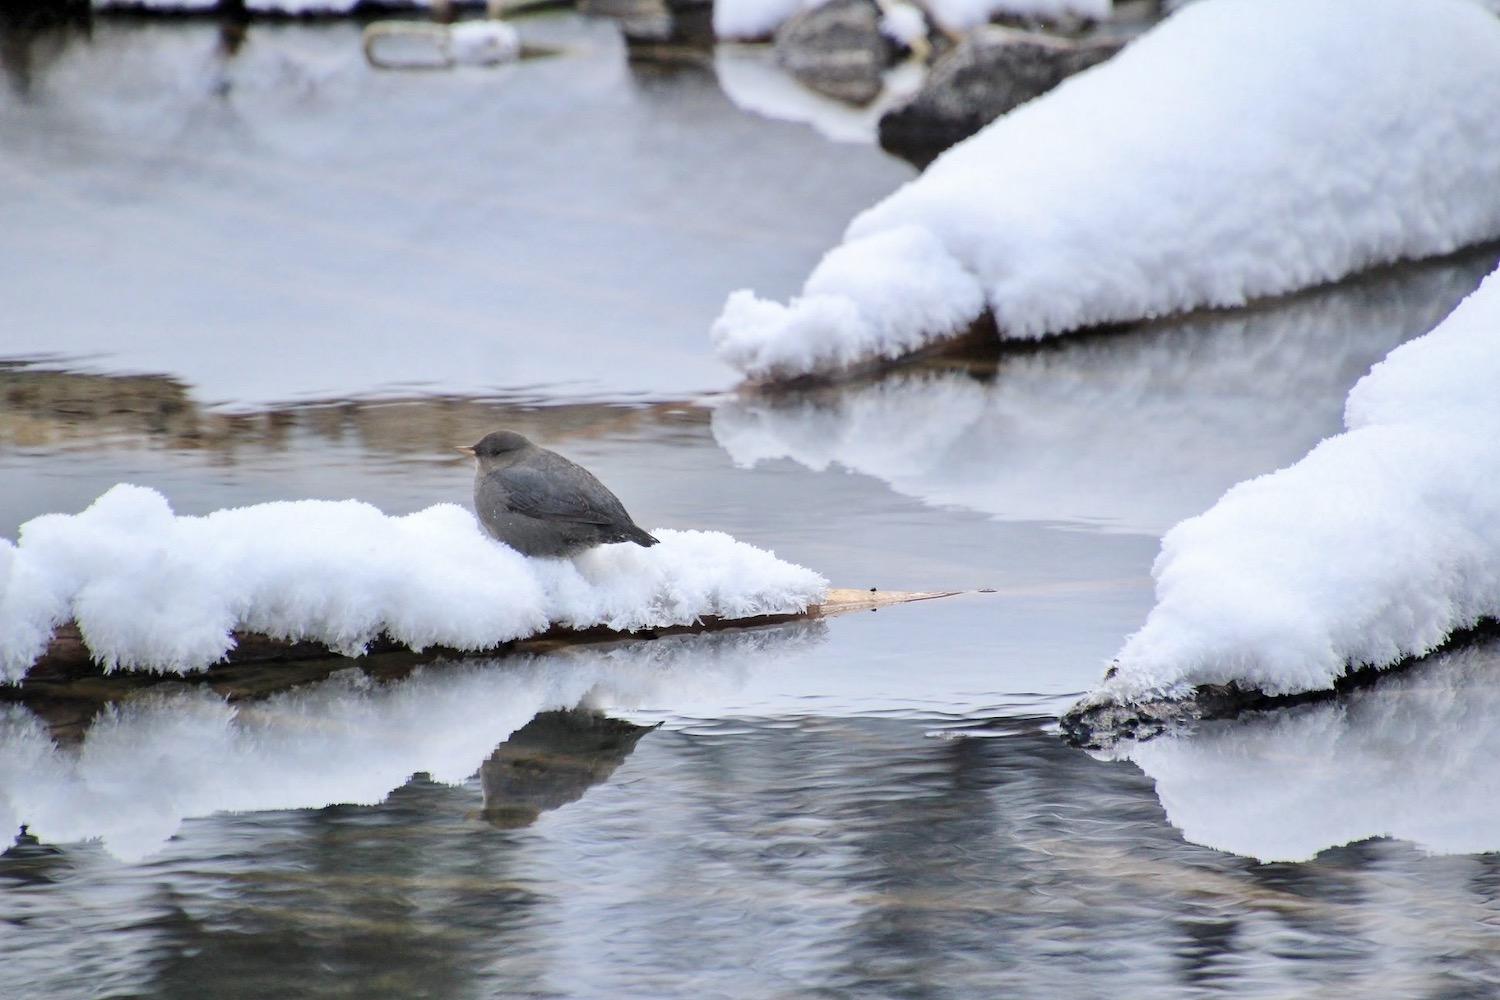 American Dippers, North America's only truly aquatic songbird, frequents the waters of Maligne Canyon in Jasper National Park.